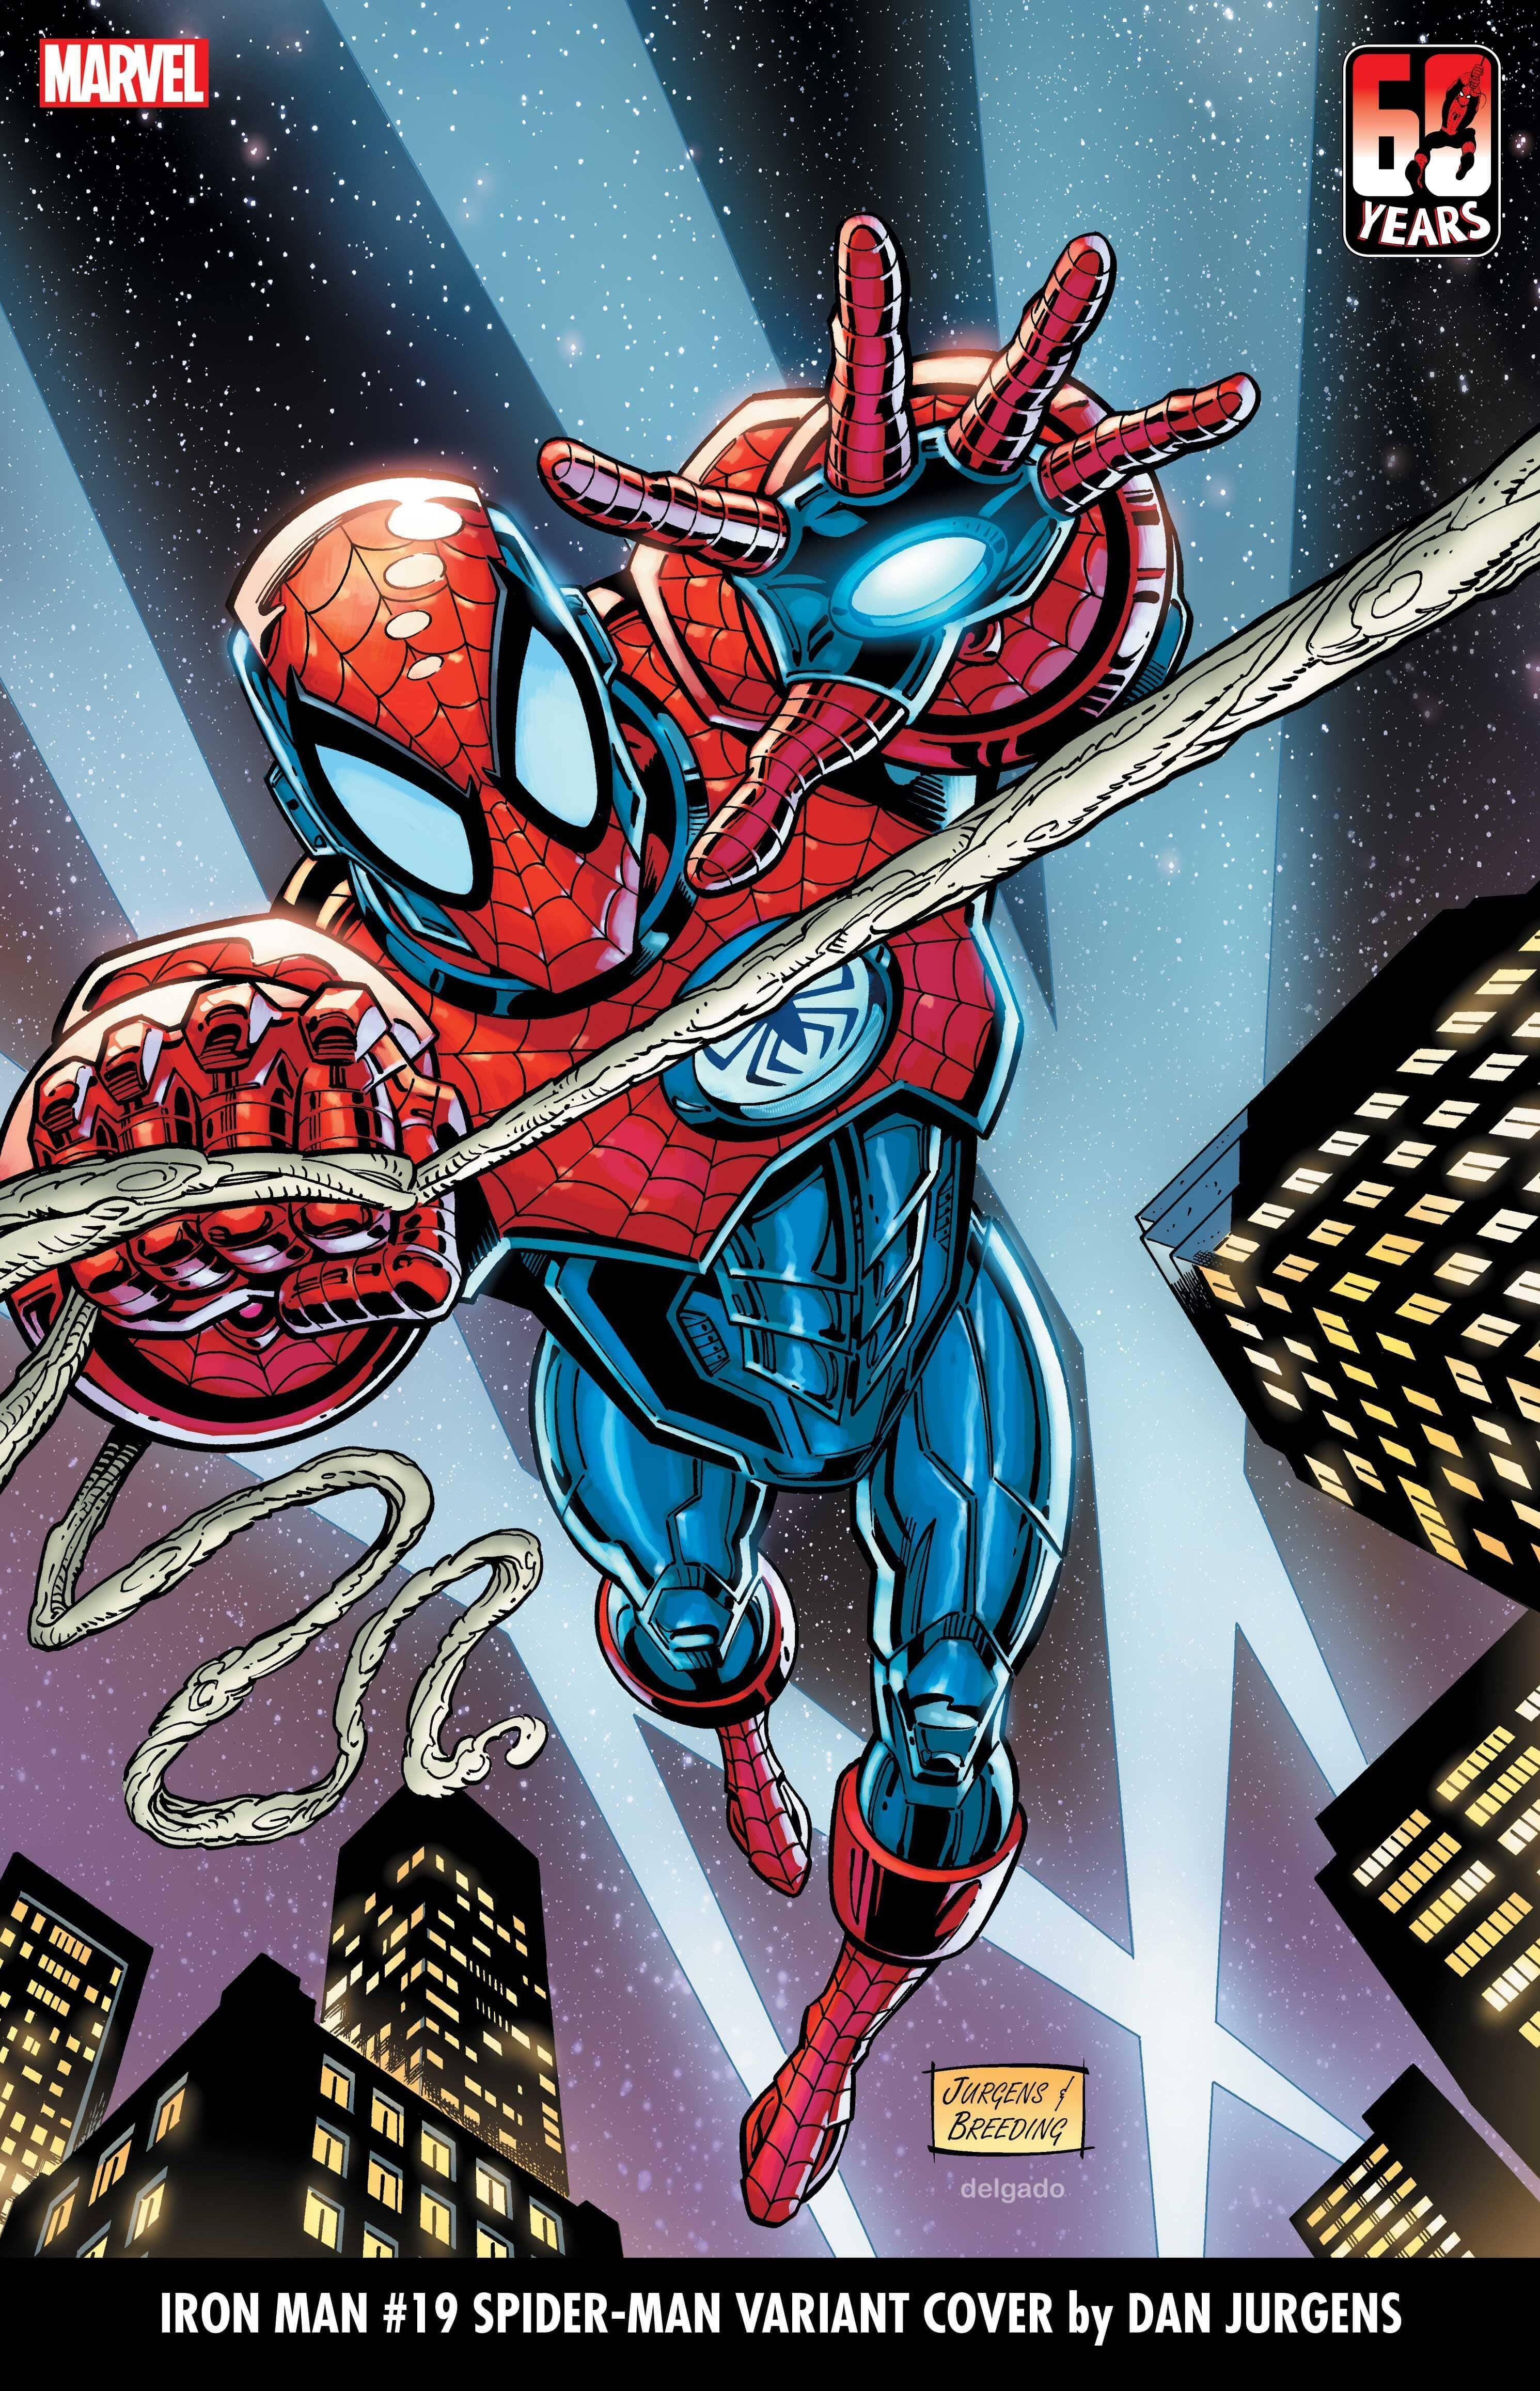 SpiderMan 60th Anniversary Variant Covers Put Other Marvel Heroes in